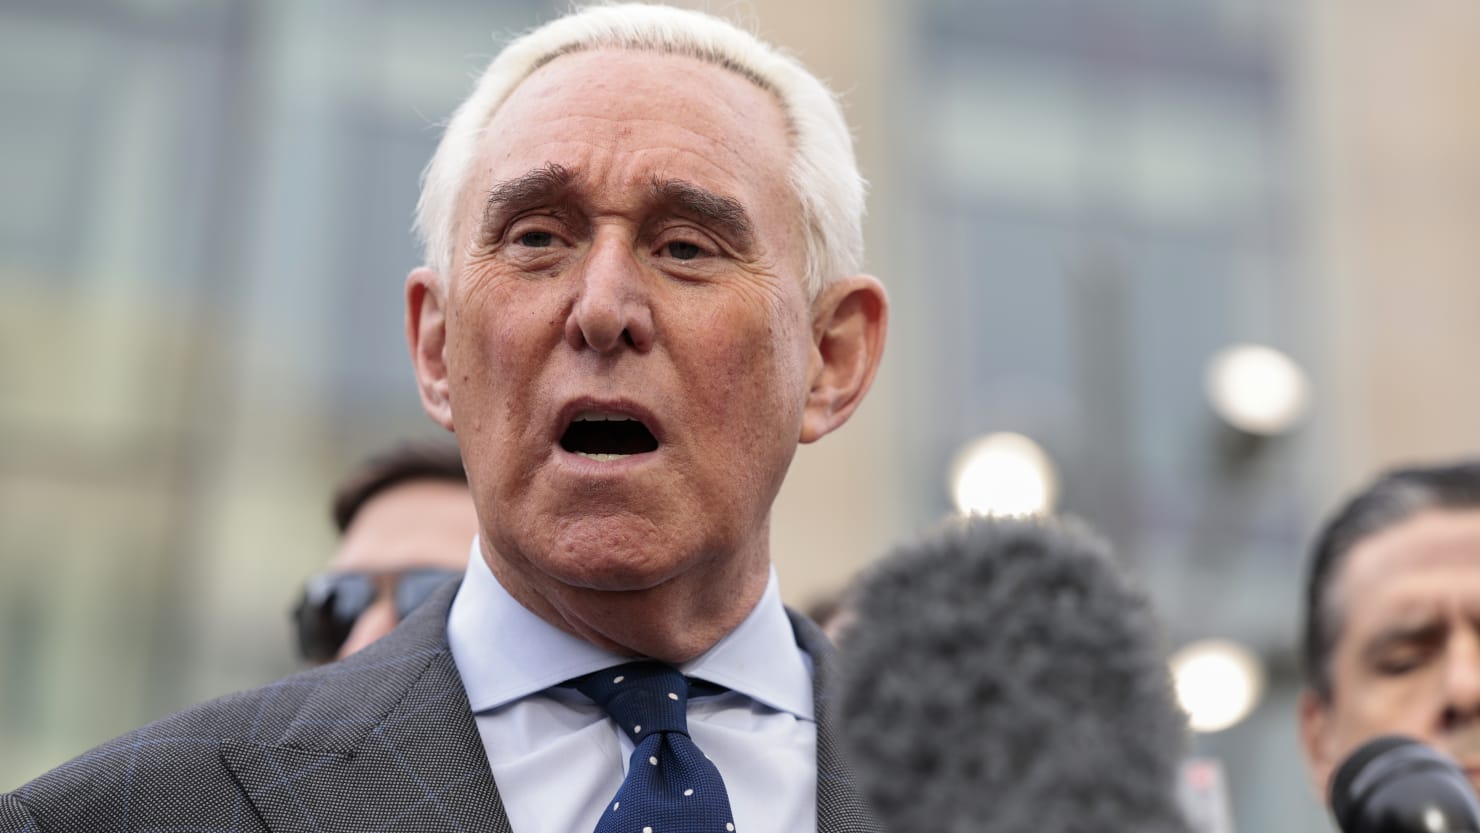 Roger Stone Threw a Fit After Not Getting Pardon, Bashed Ivanka Trump as ‘Abortionist Bitch’